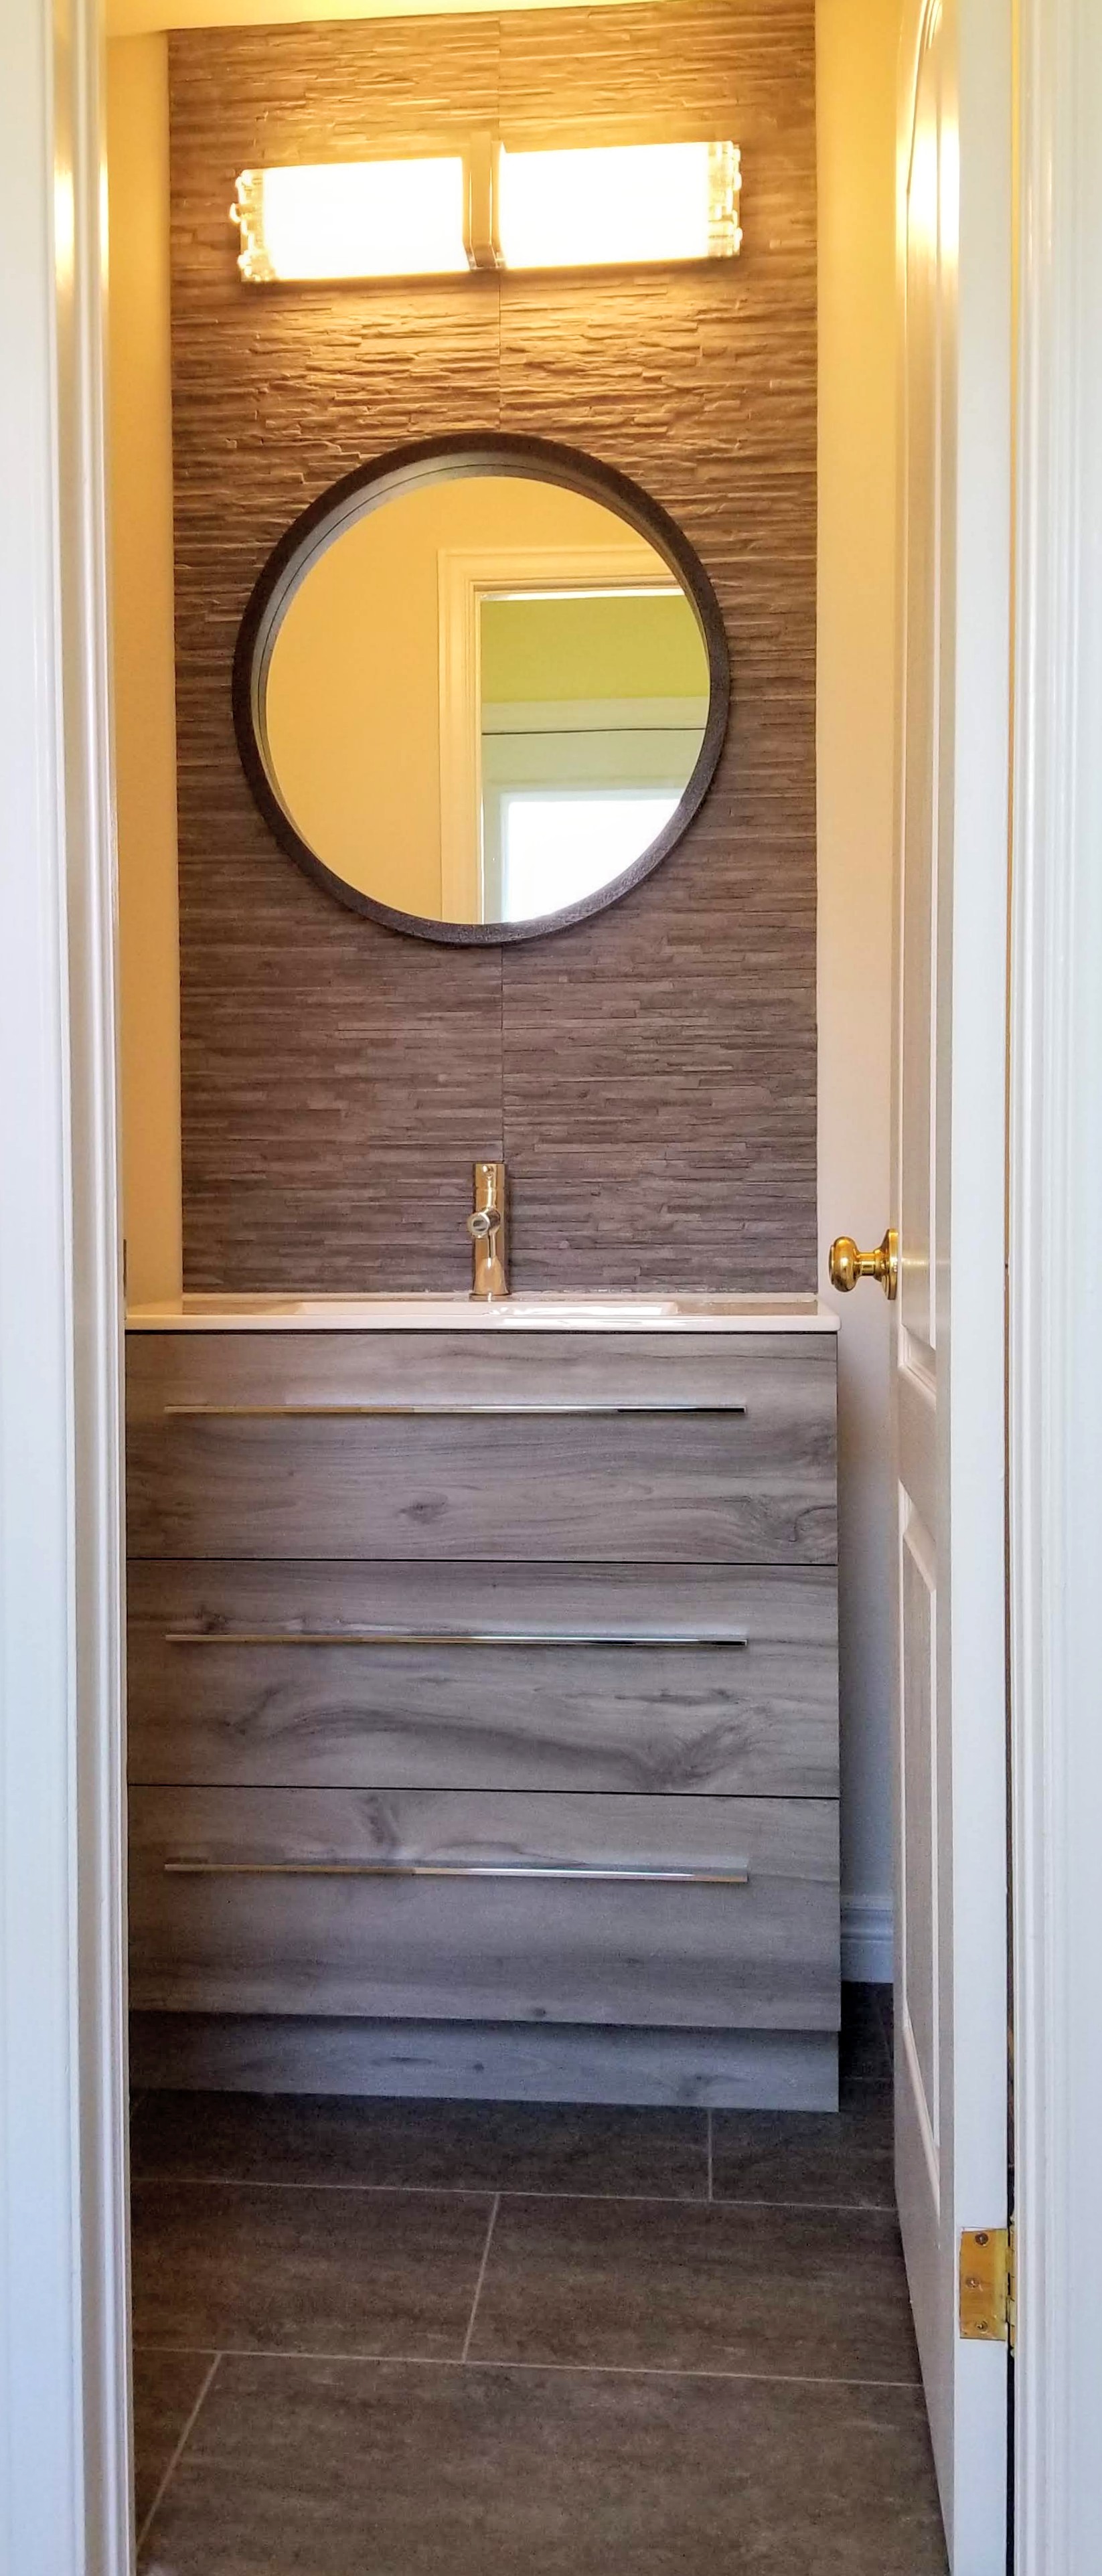 Grey bathroom vanity with accent tile wall